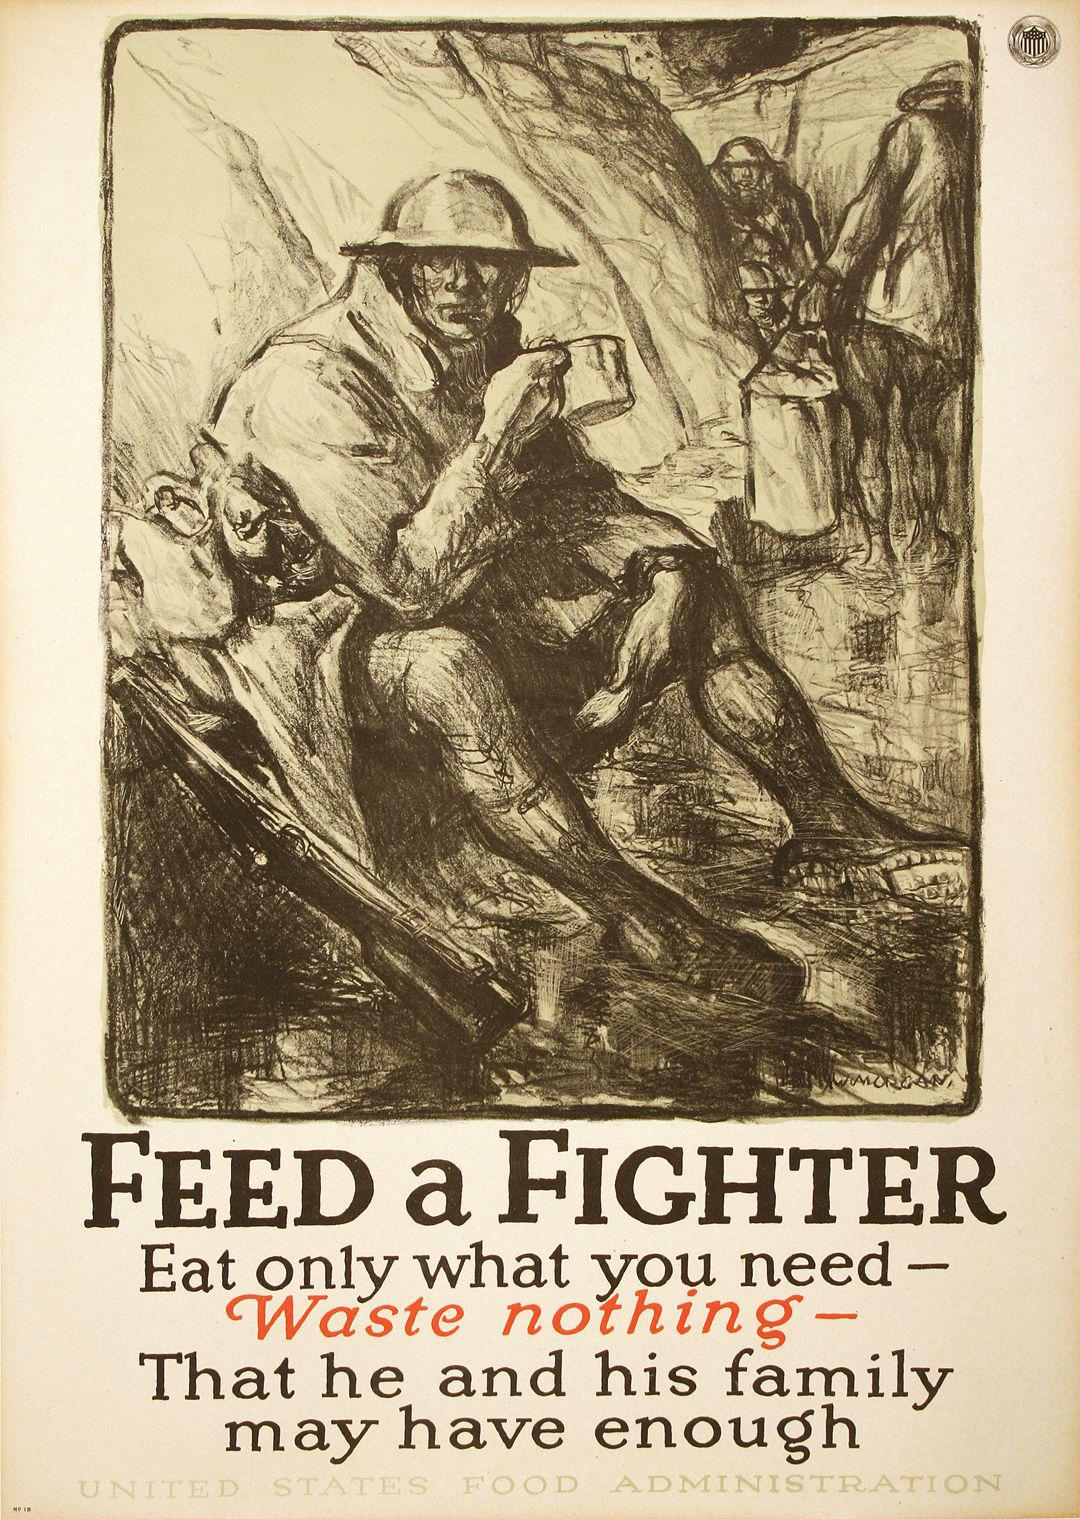 Authentic World War I Poster - Feed a Fighter by Wallace Morgan 1918